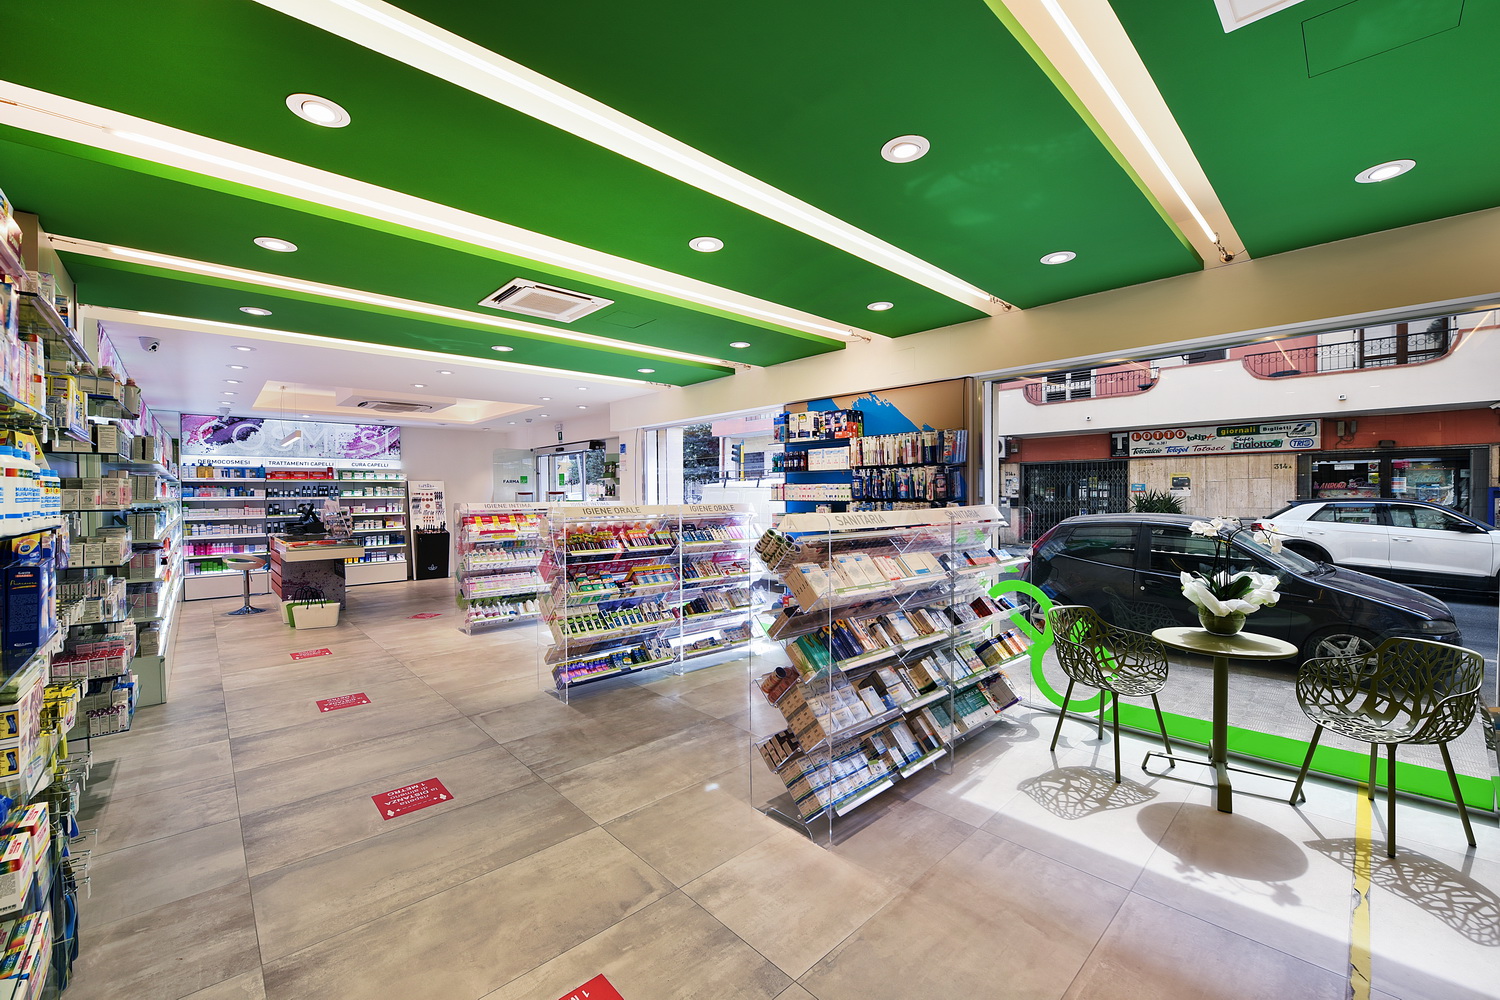 Architecture for pharmacies